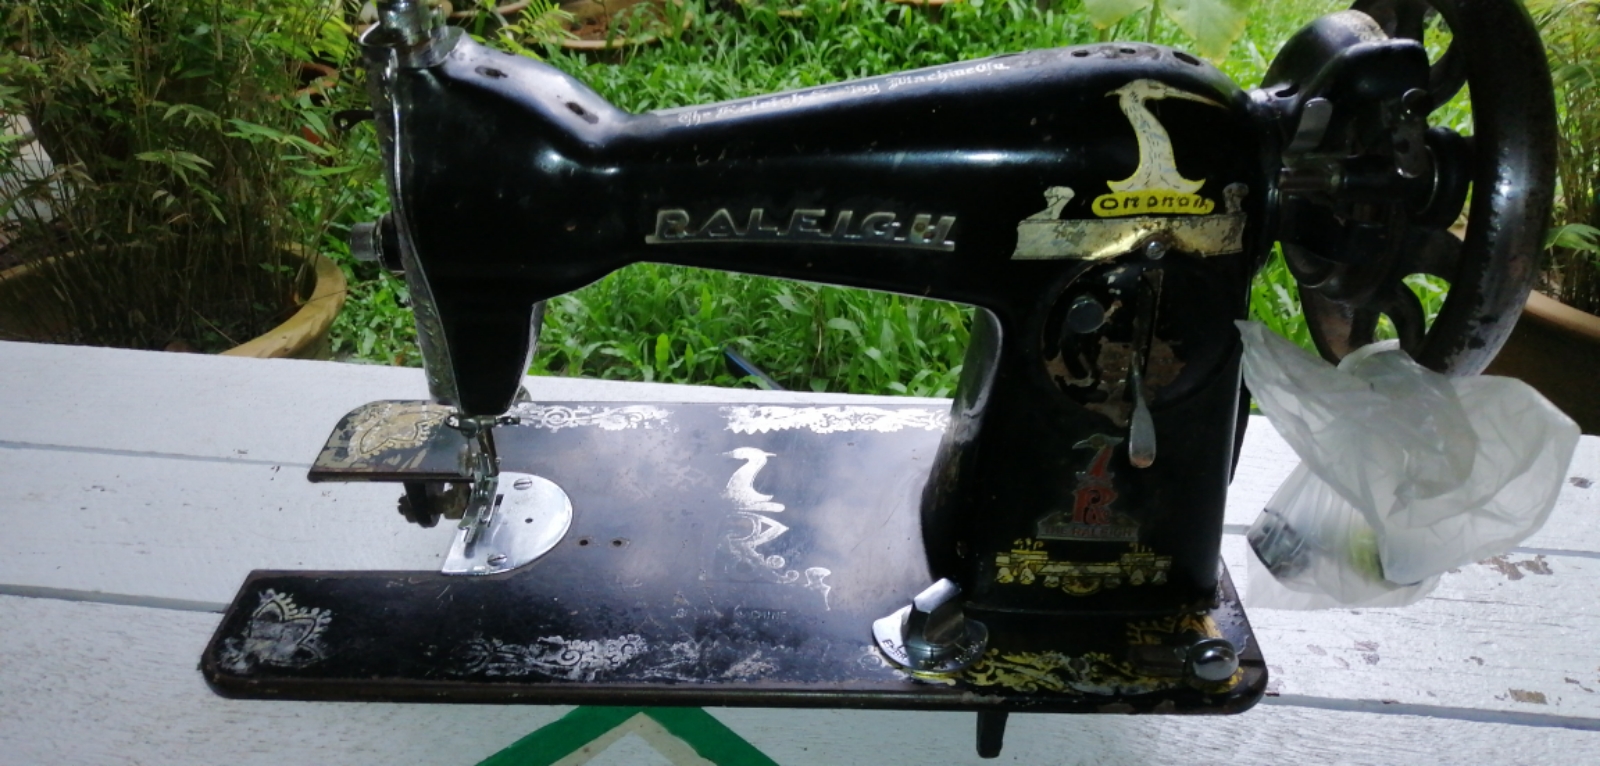 REPAIR SEVIS FOR RALEIGH ANTIQUE SEWING MACHINE 